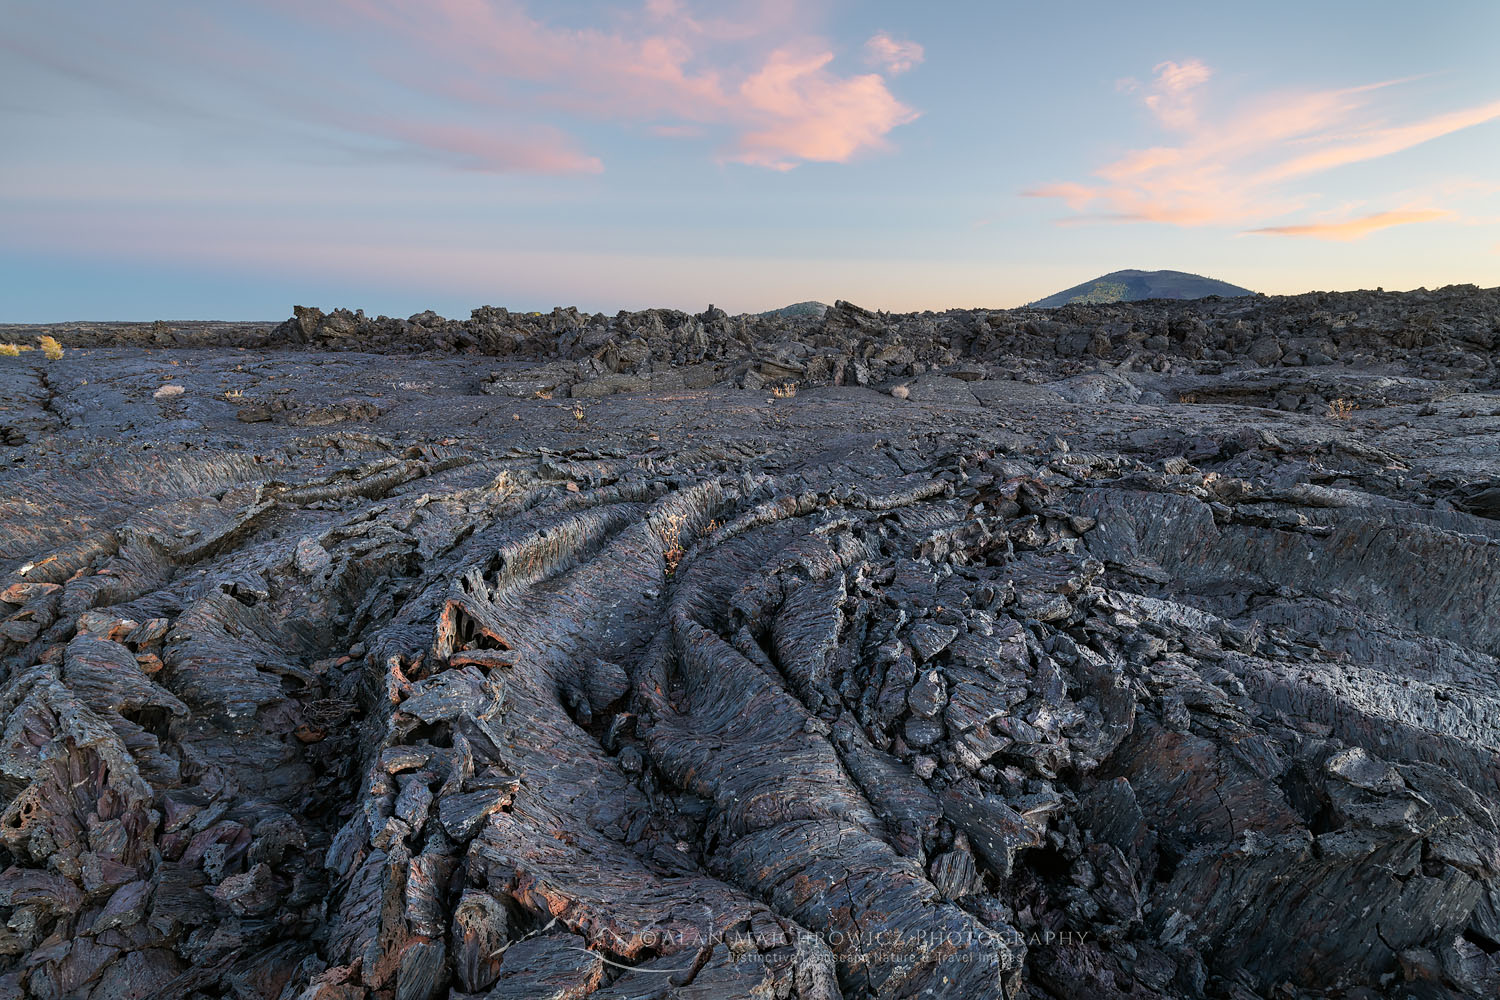 Twilight alpenglow over Blue Dragon Lava Flow, Craters of the Moon National Monument #73919